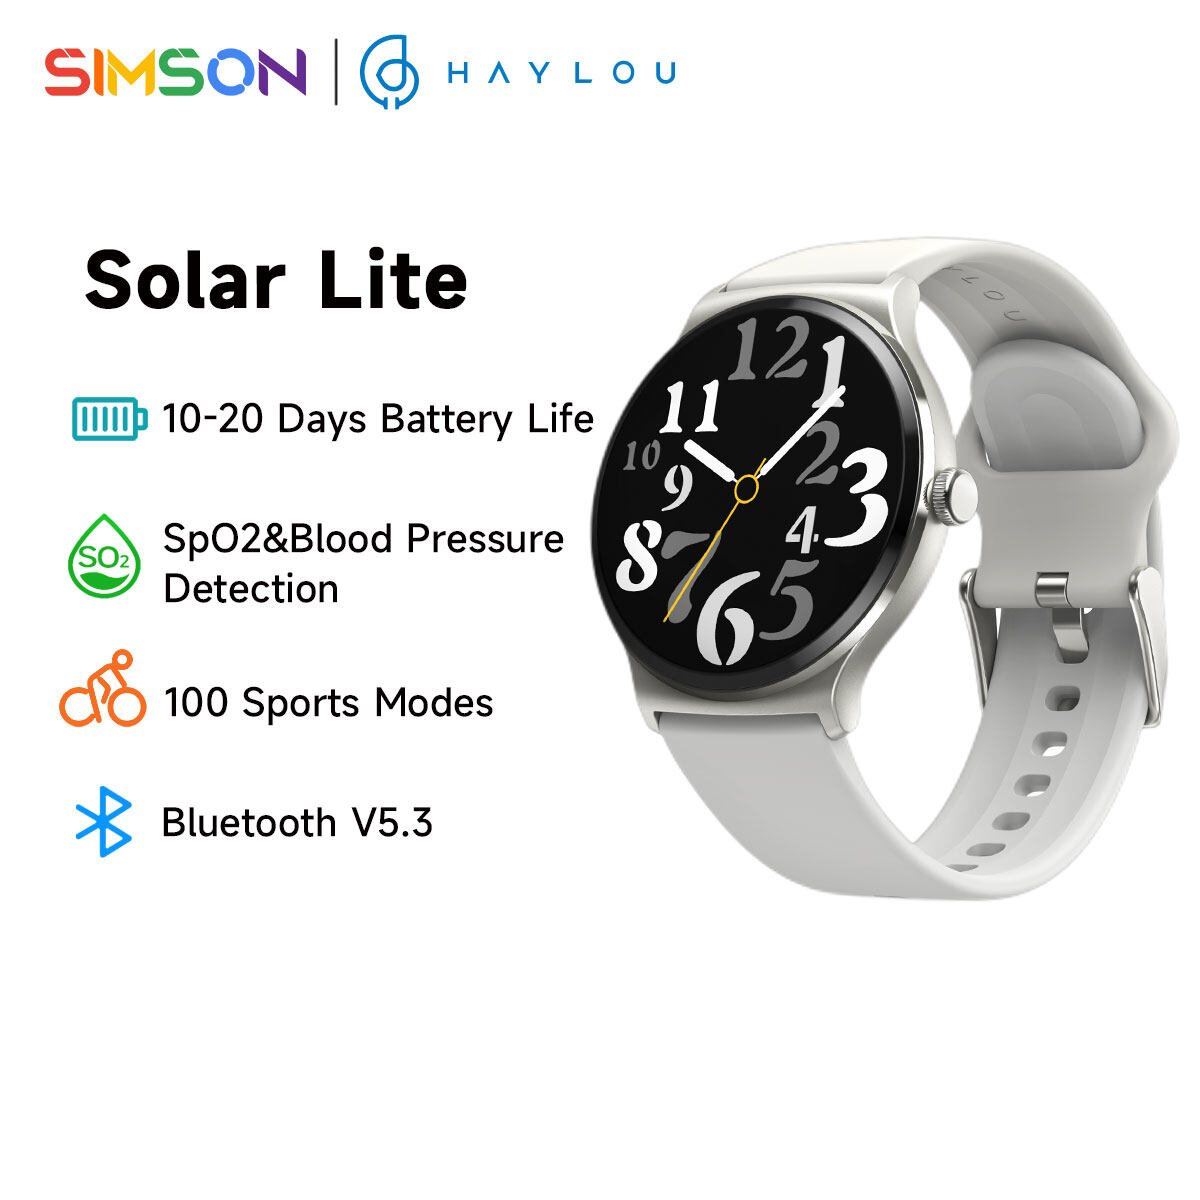 Smartwatch Haylou Solar Lite Bluetooth5.3 1.38 inchTFT HD large display